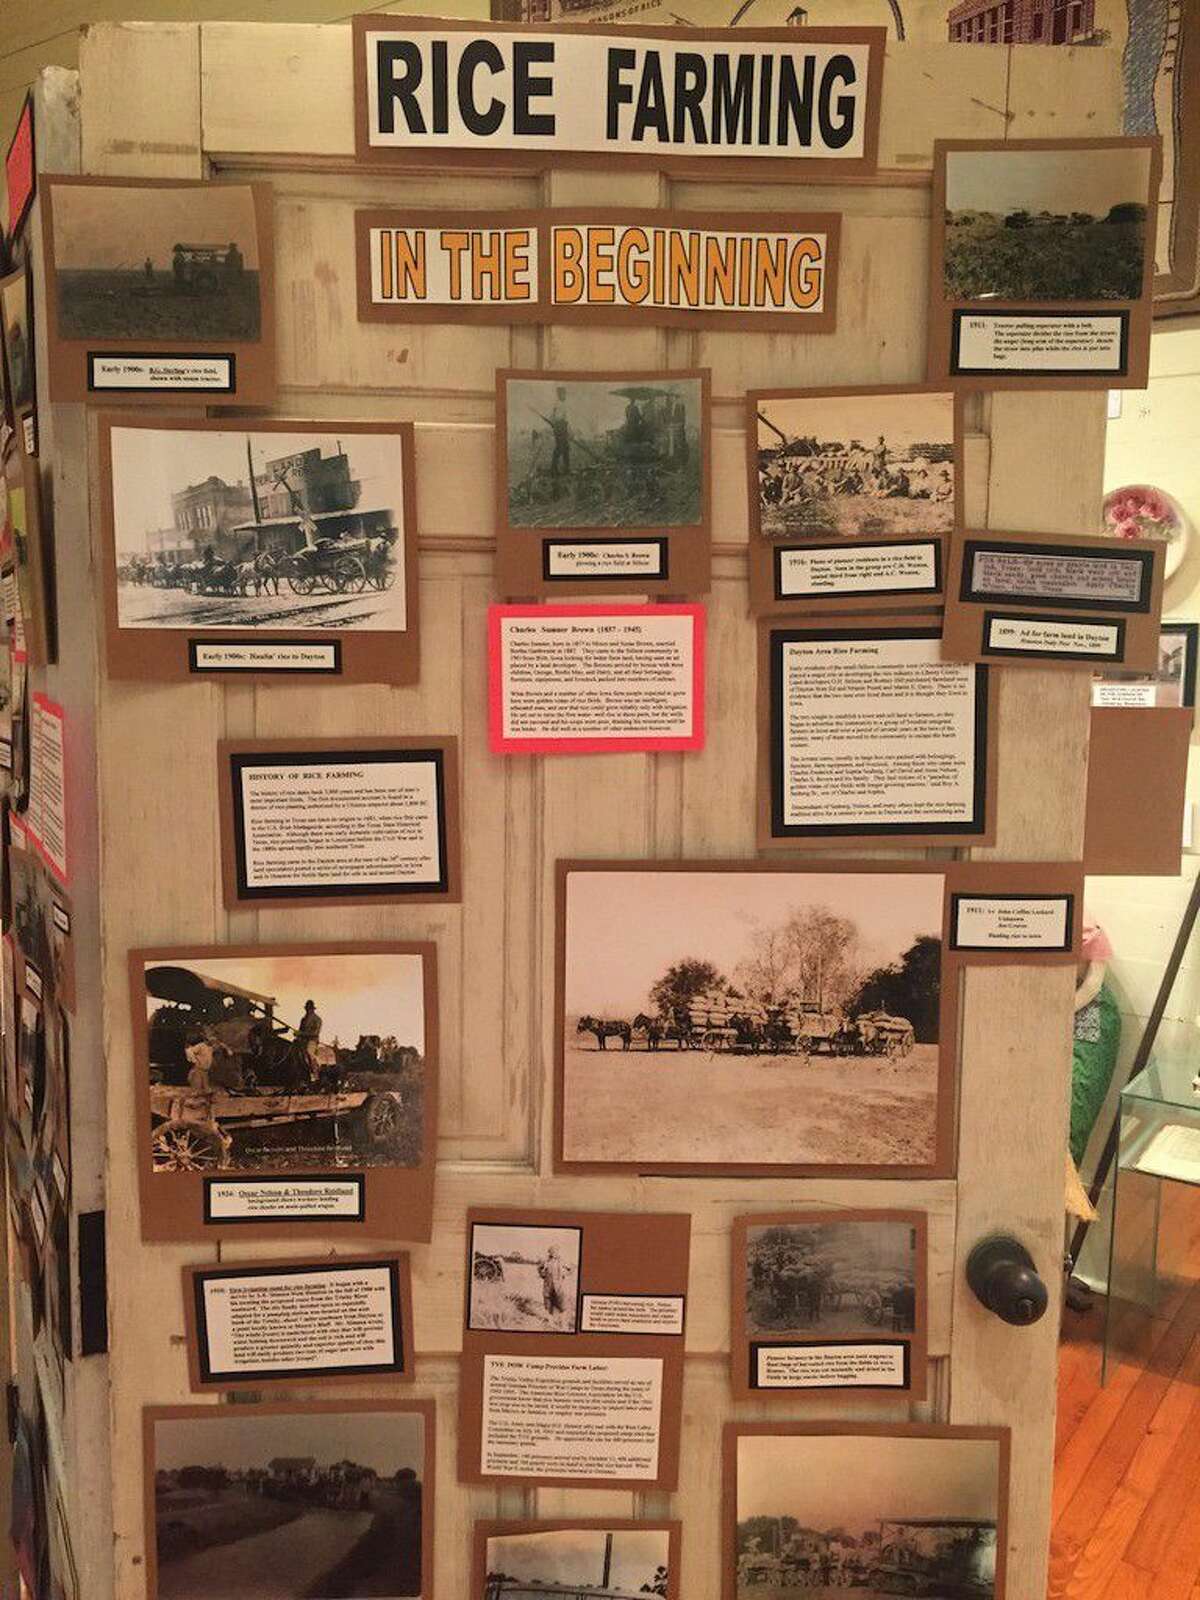 The Old School Museum in Dayton, Texas now has an exhibit looking back at the beginnings of rice farming in the Dayton area. The museum is open on Saturdays from 10 a.m. to 2 p.m.